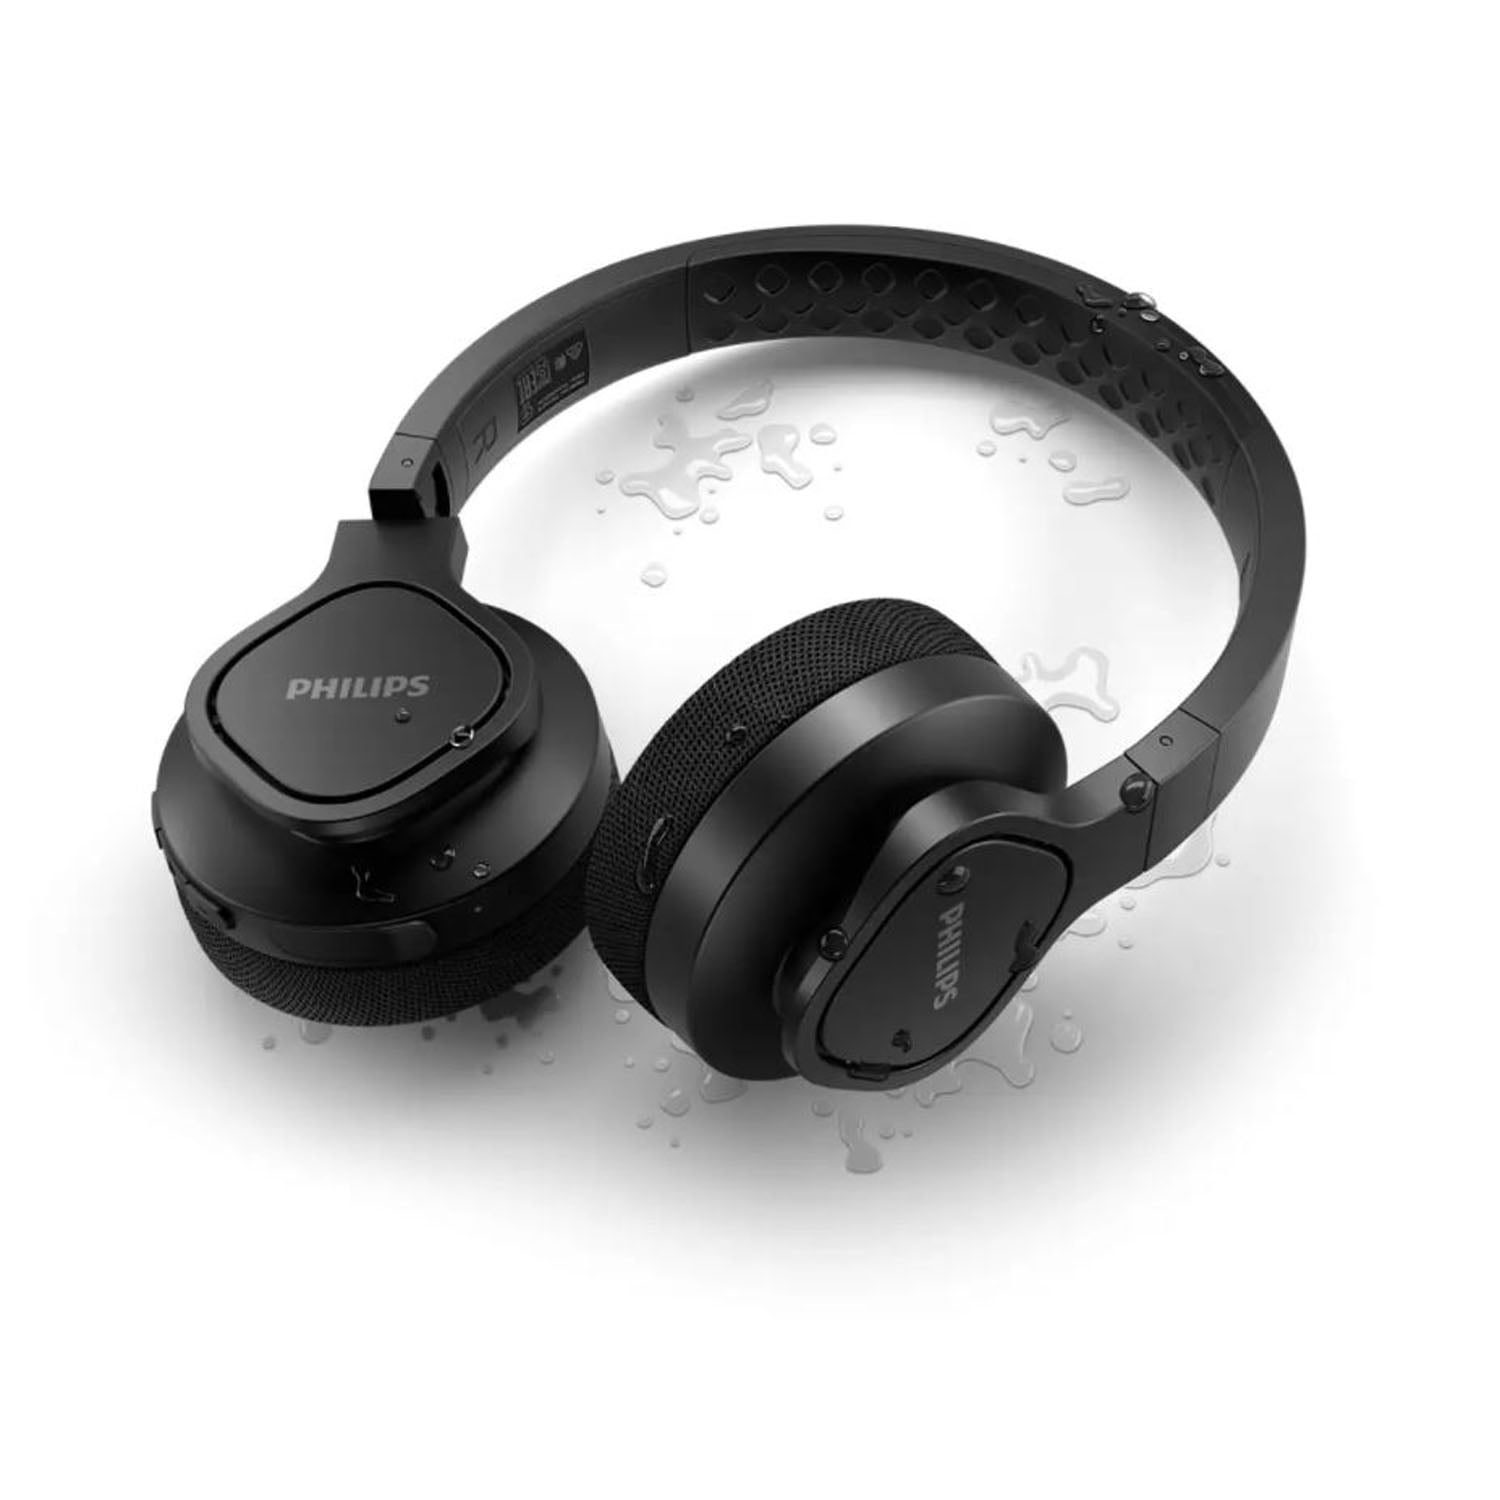 A4216 over-Head Sports Headphones with Hours Play Time, IP55 Protection, Washable Ear-Cups, Black, TAA4216BK - Walmart.com